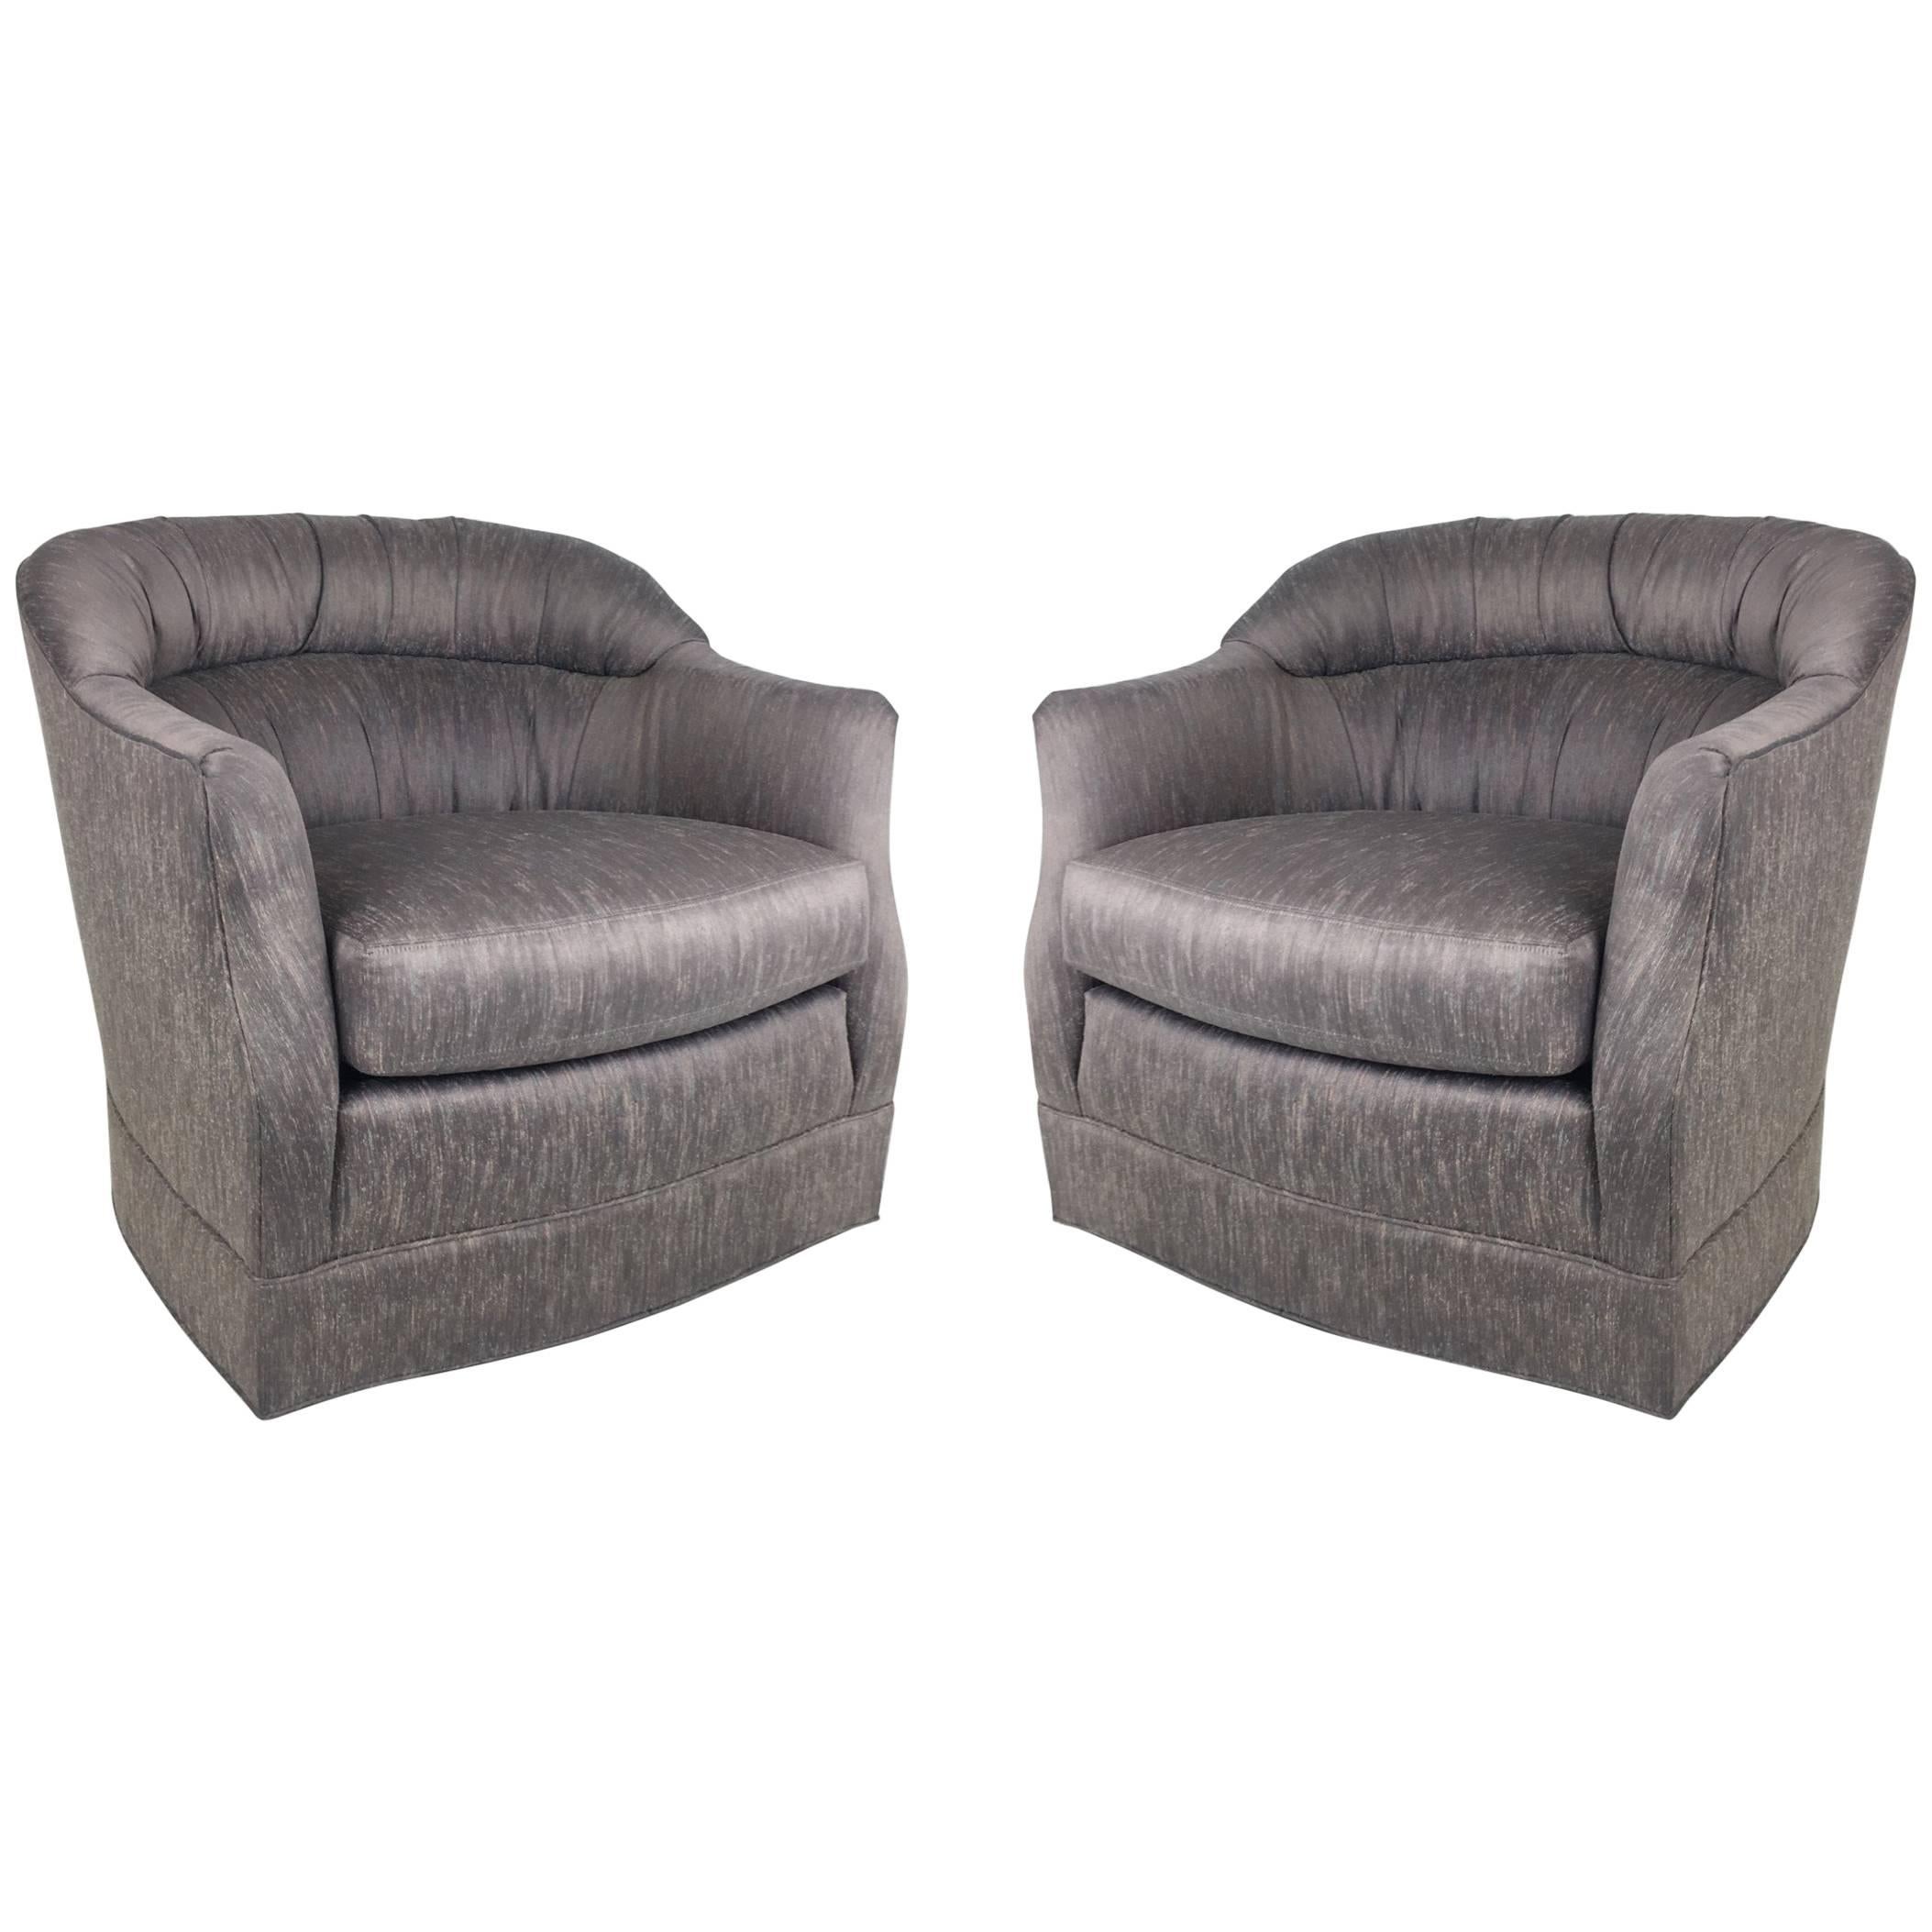 Pair of Swivel Lounge Chairs after Ward Bennett